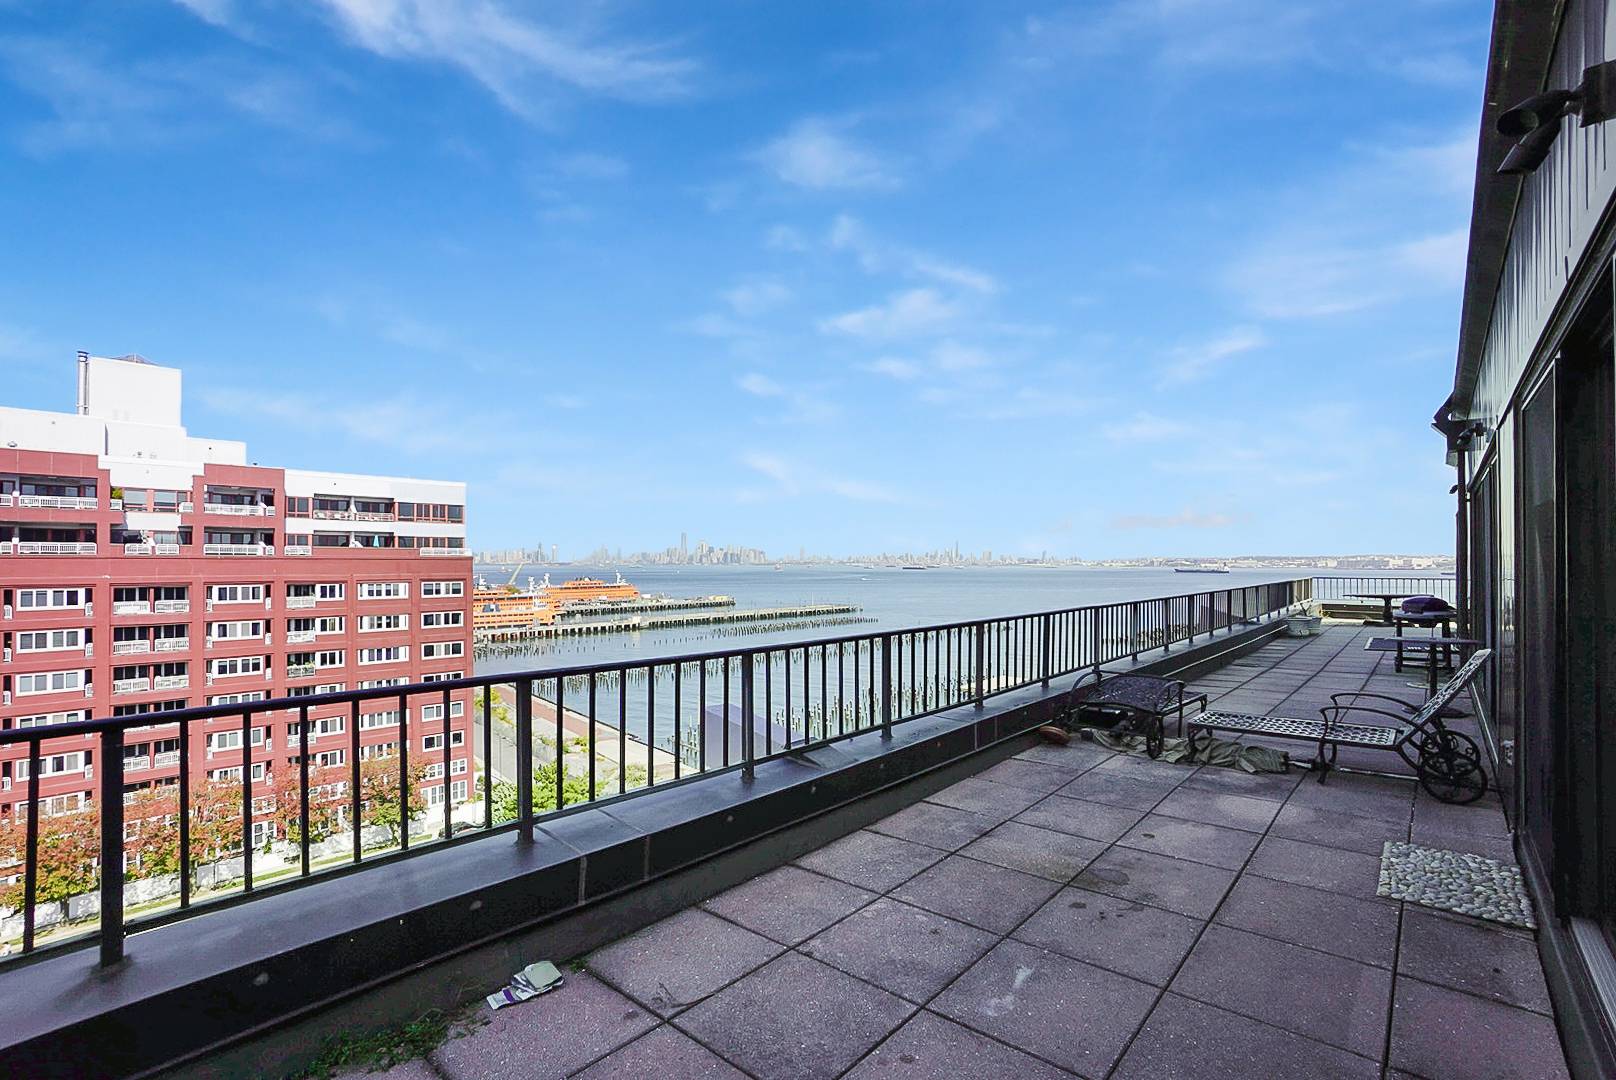 Rare opportunity to own the beautiful penthouse apartment in the desirable waterfront Bay Street Landing.